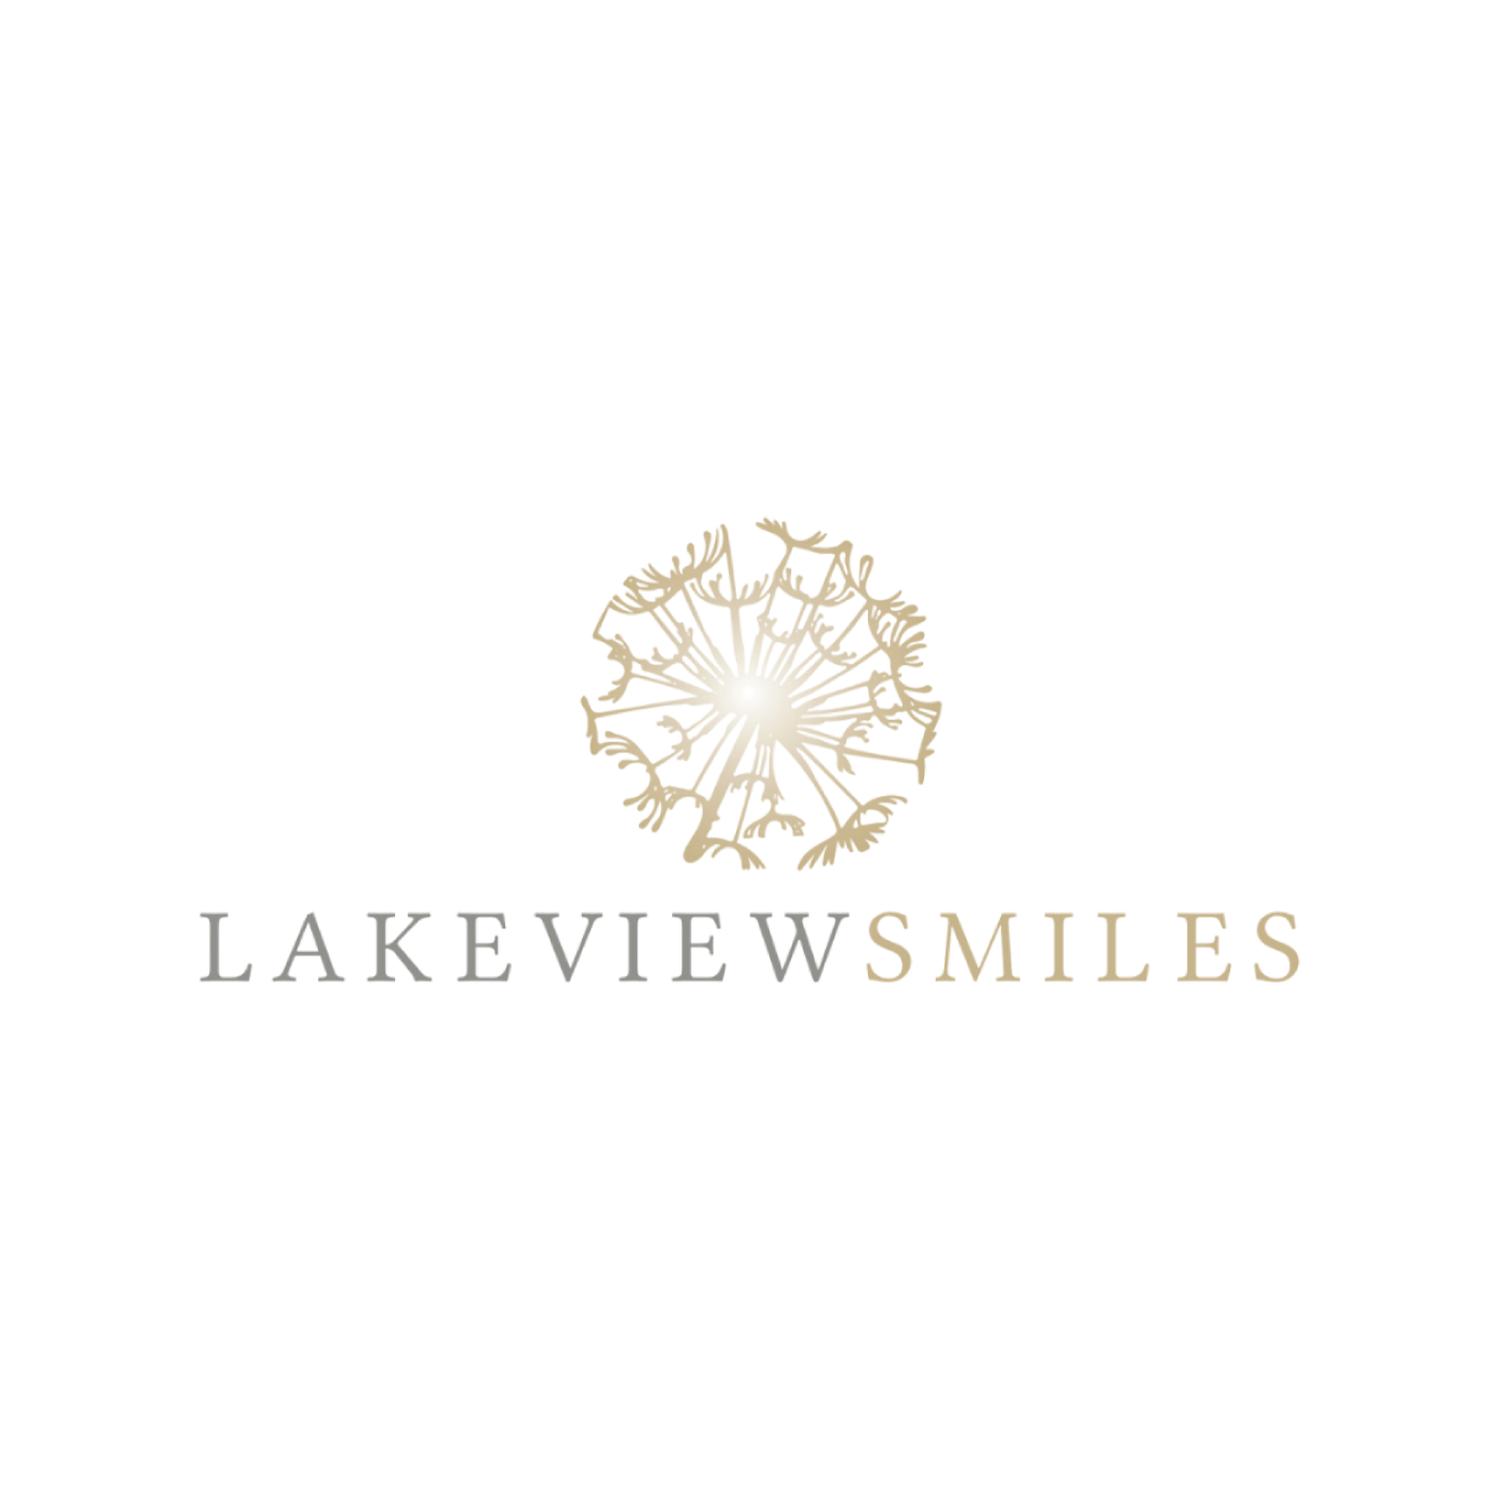 Lakeview Smiles - Lakeview - Chicago, IL 60657 - (773)570-2549 | ShowMeLocal.com